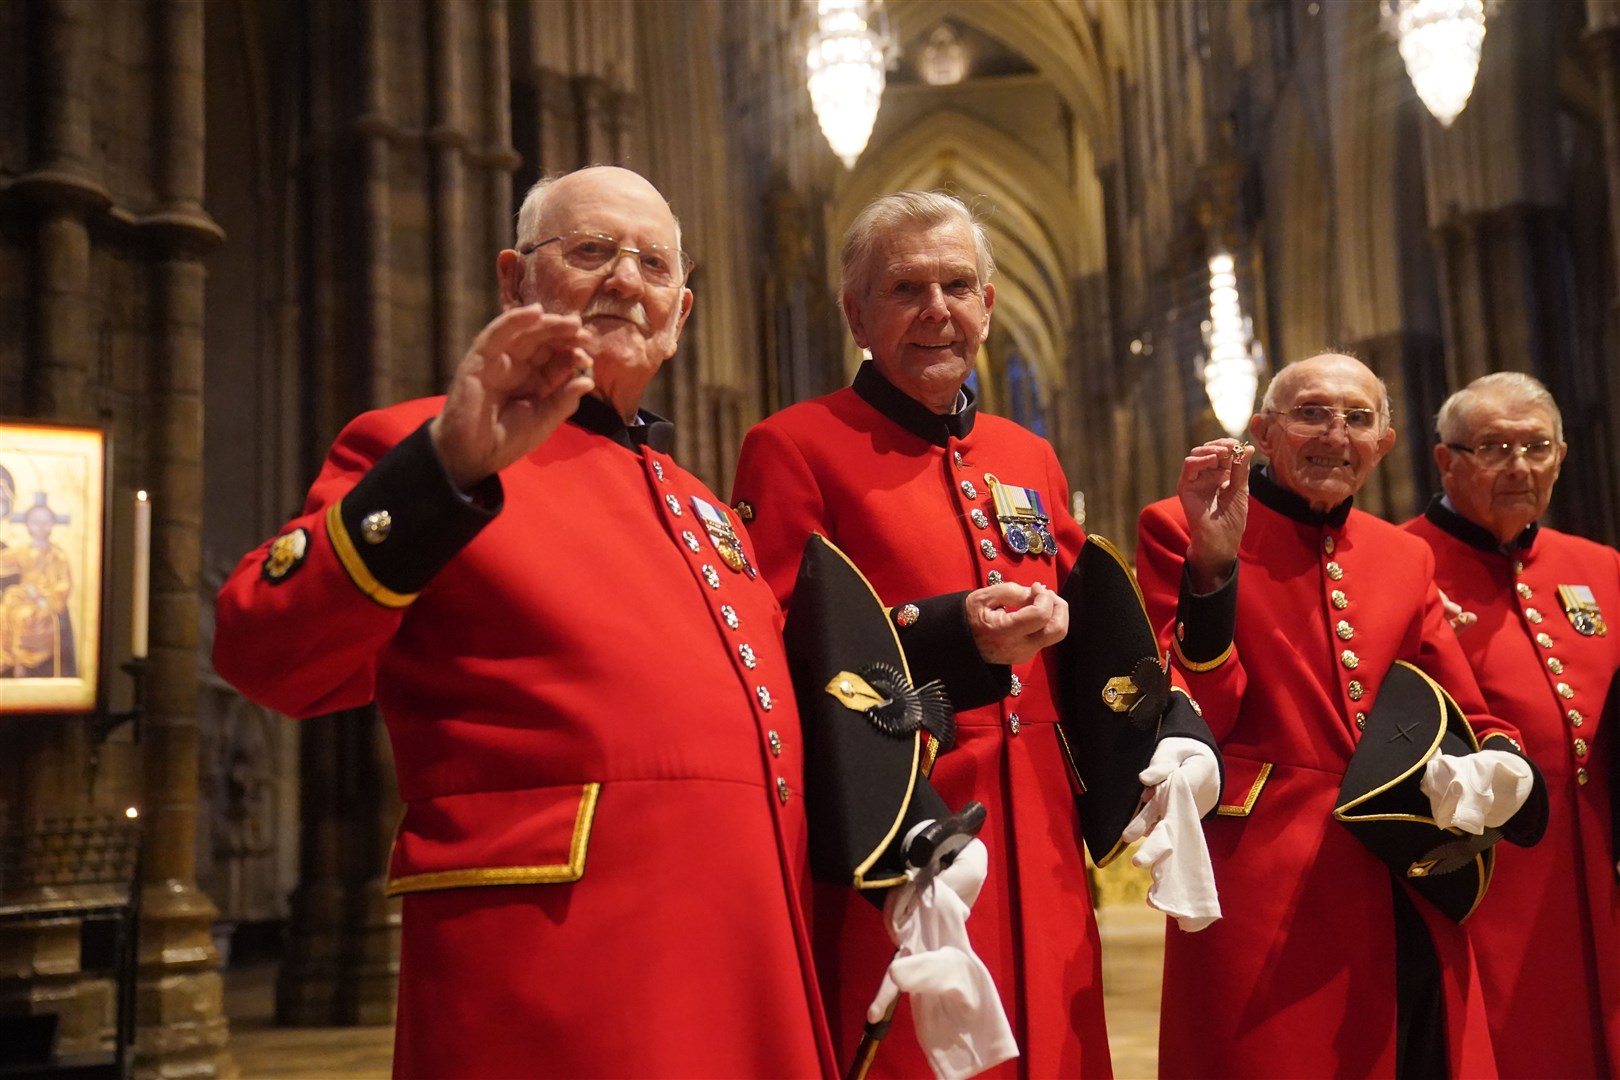 The Chelsea Pensioners who are Korean War veterans also met the President at Westminster Abbey earlier in the week (Victoria Jones/PA)